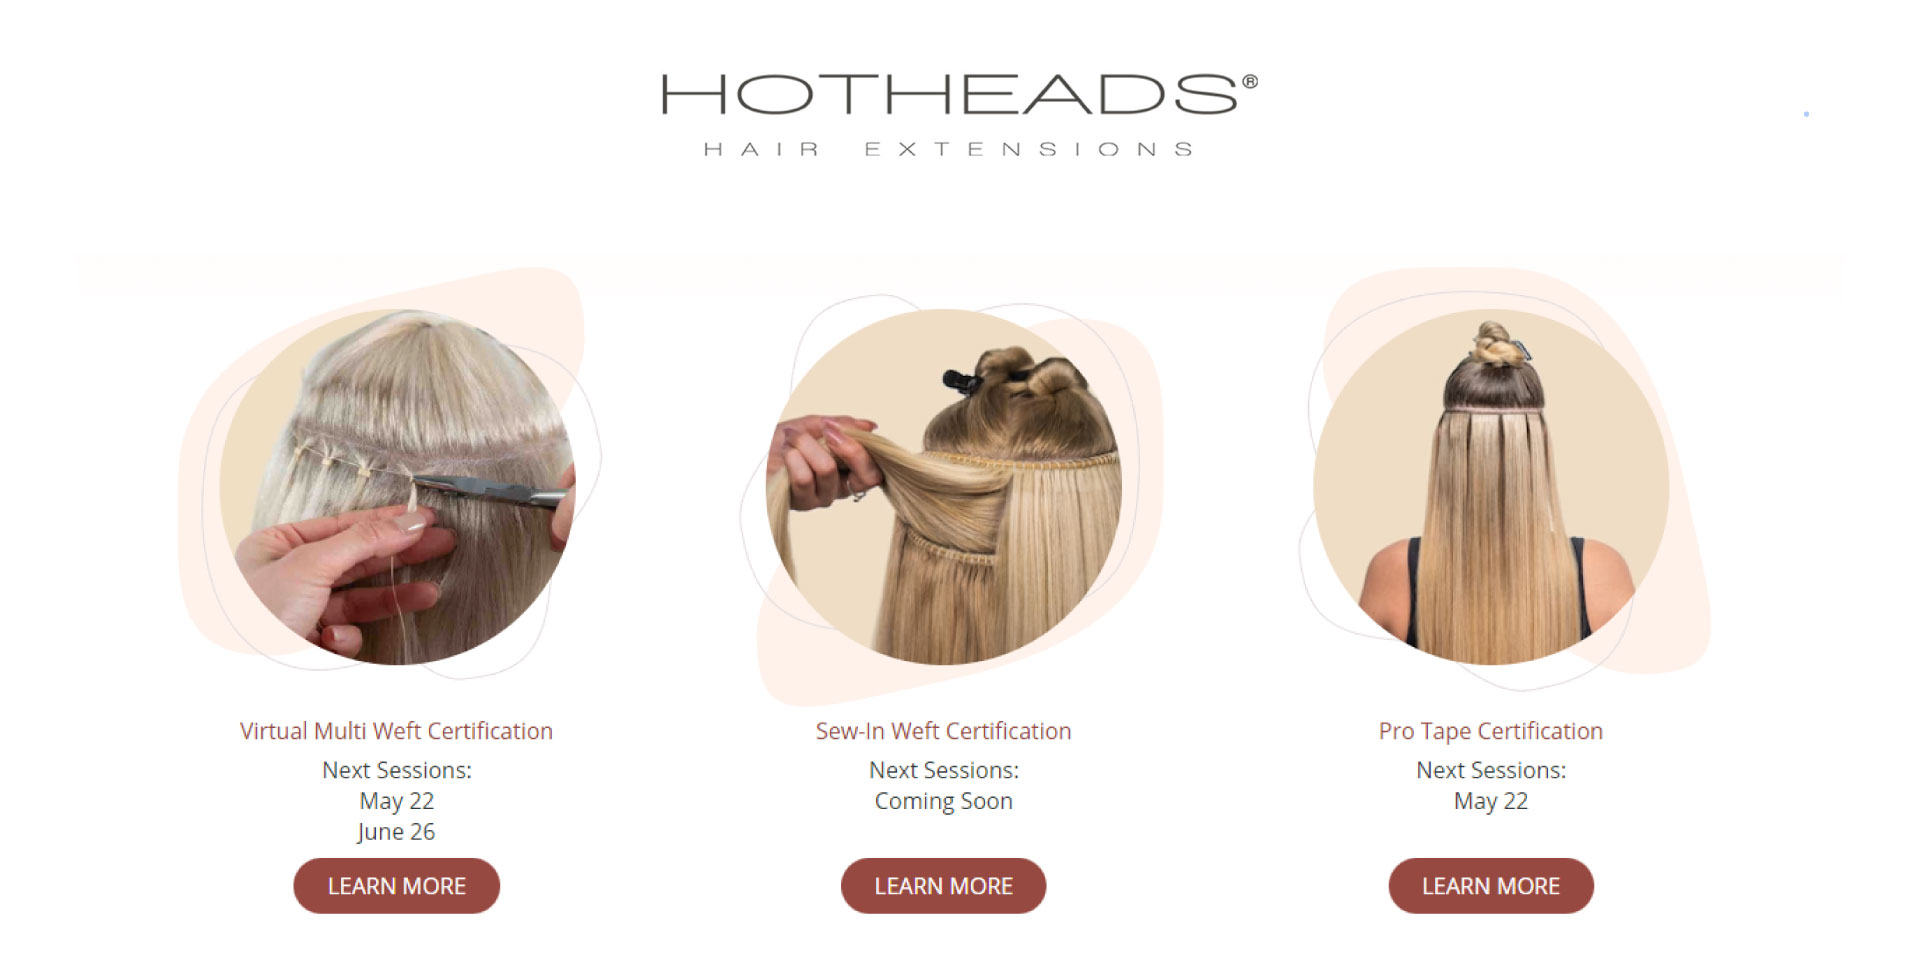 10. Hotheads Hair Extensions - Ash Blonde Highlight Extensions - wide 7